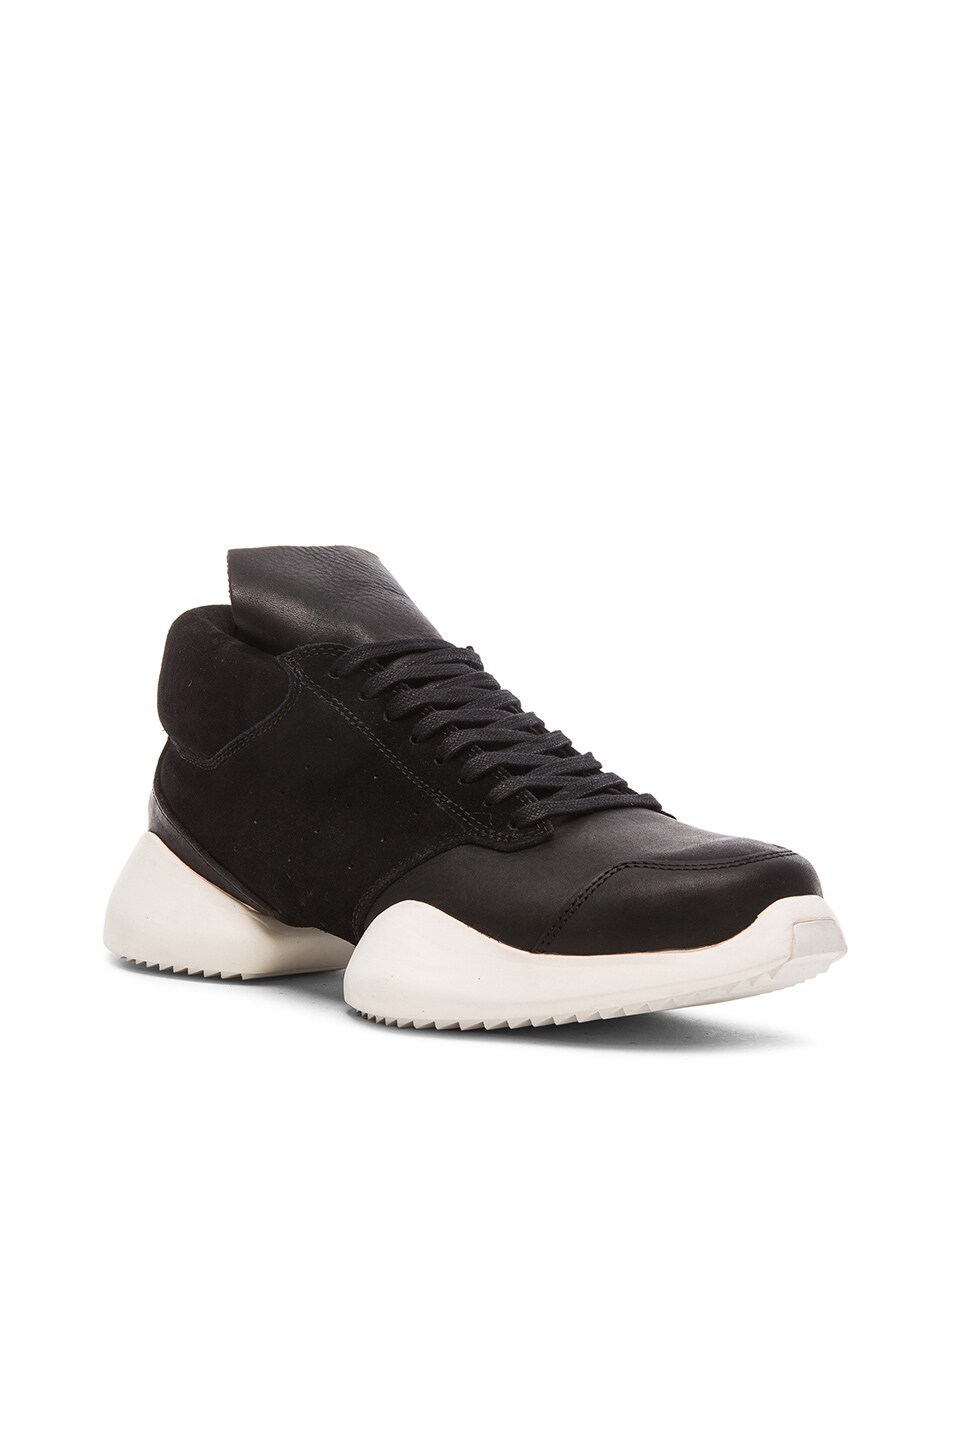 Image 1 of Rick Owens x Adidas Vicious Leather Runners in Black